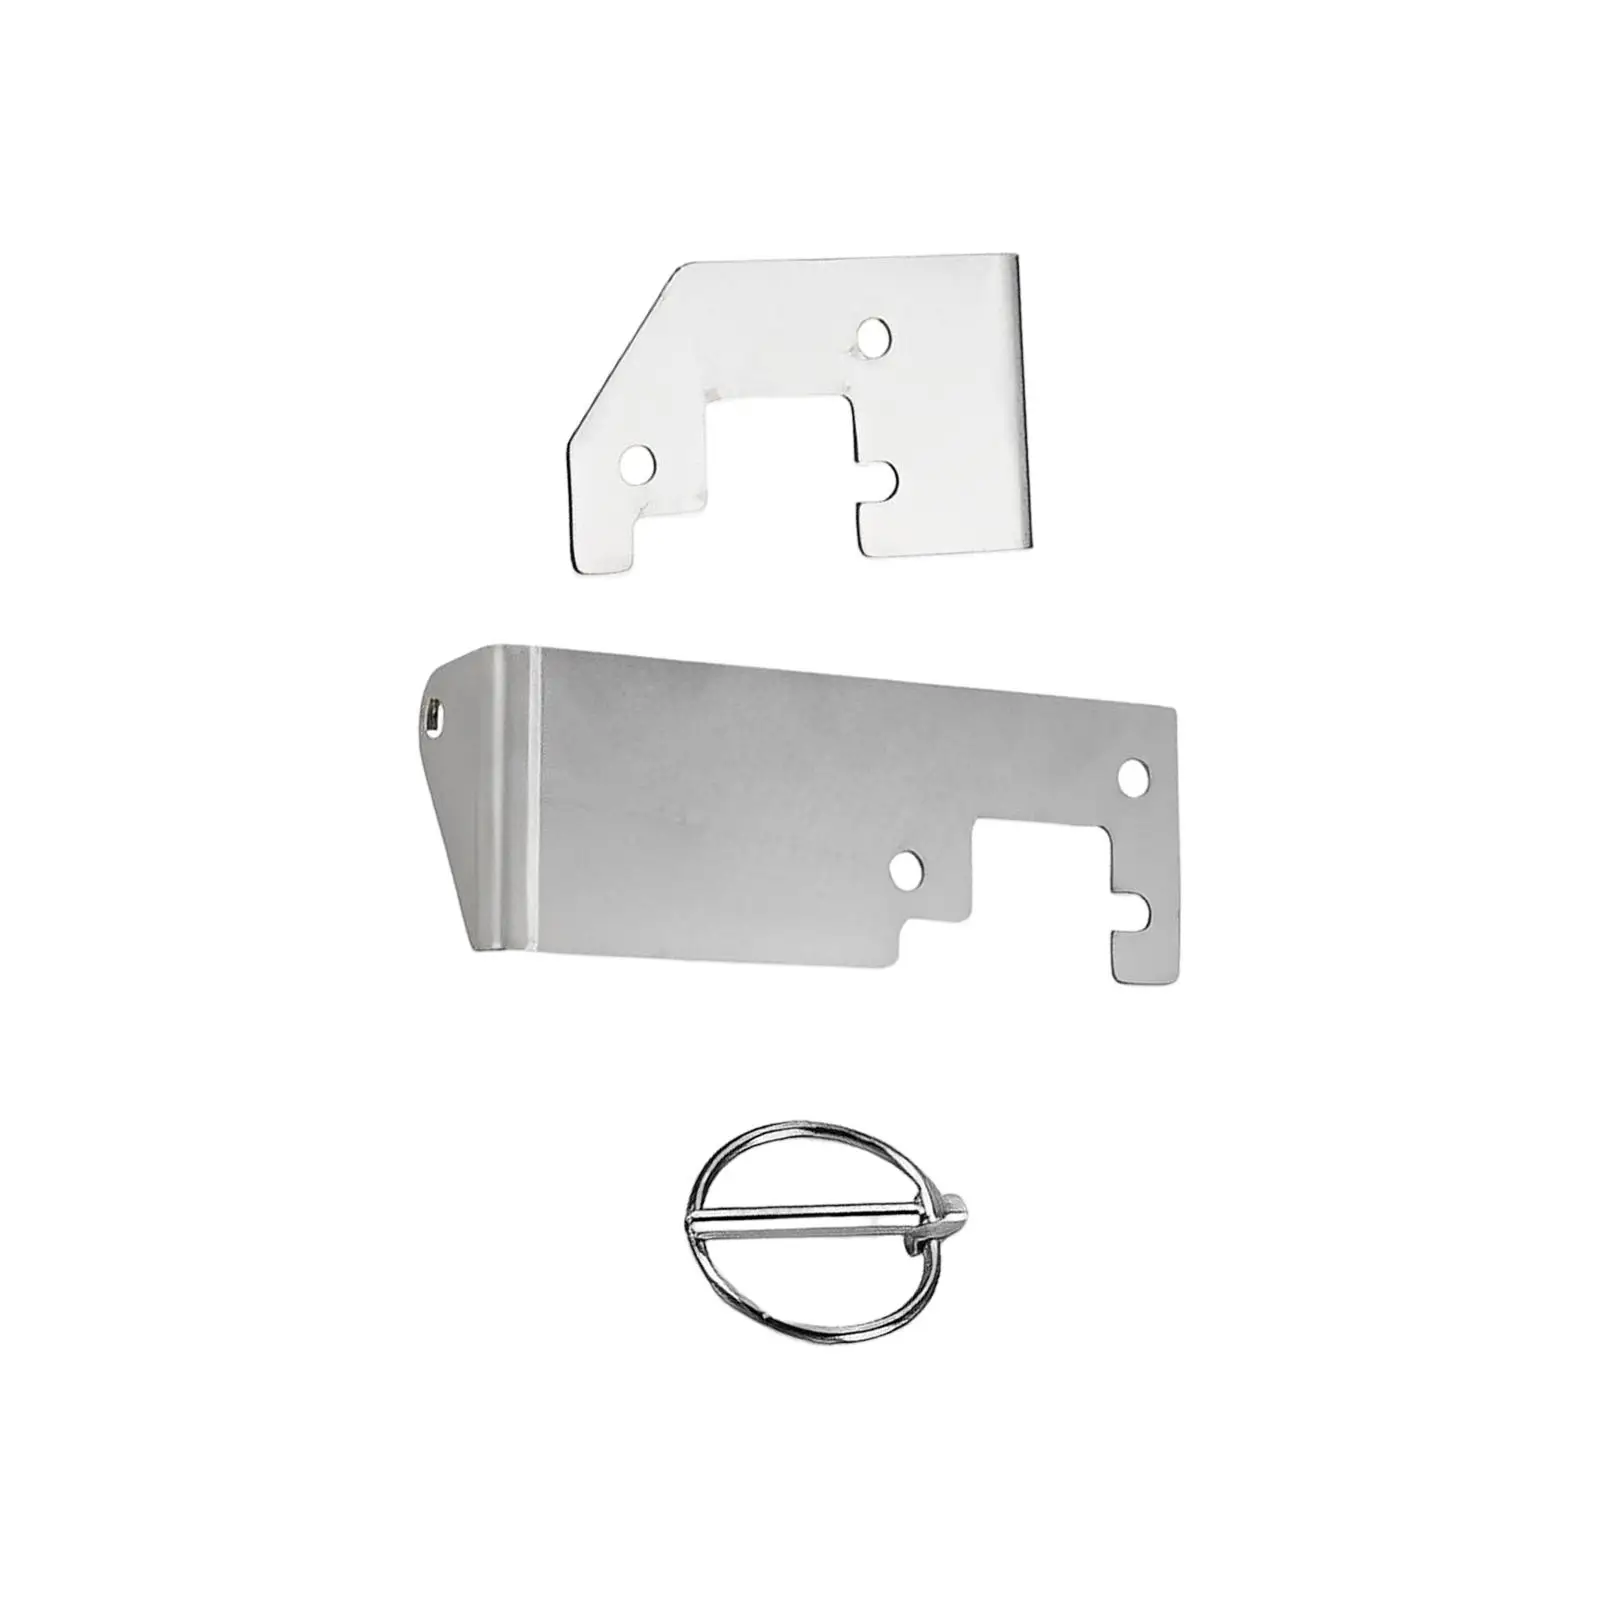 H1 H2 Roof Protection Metal Rear Door Lock for Fiat Ducato Boxer Relay